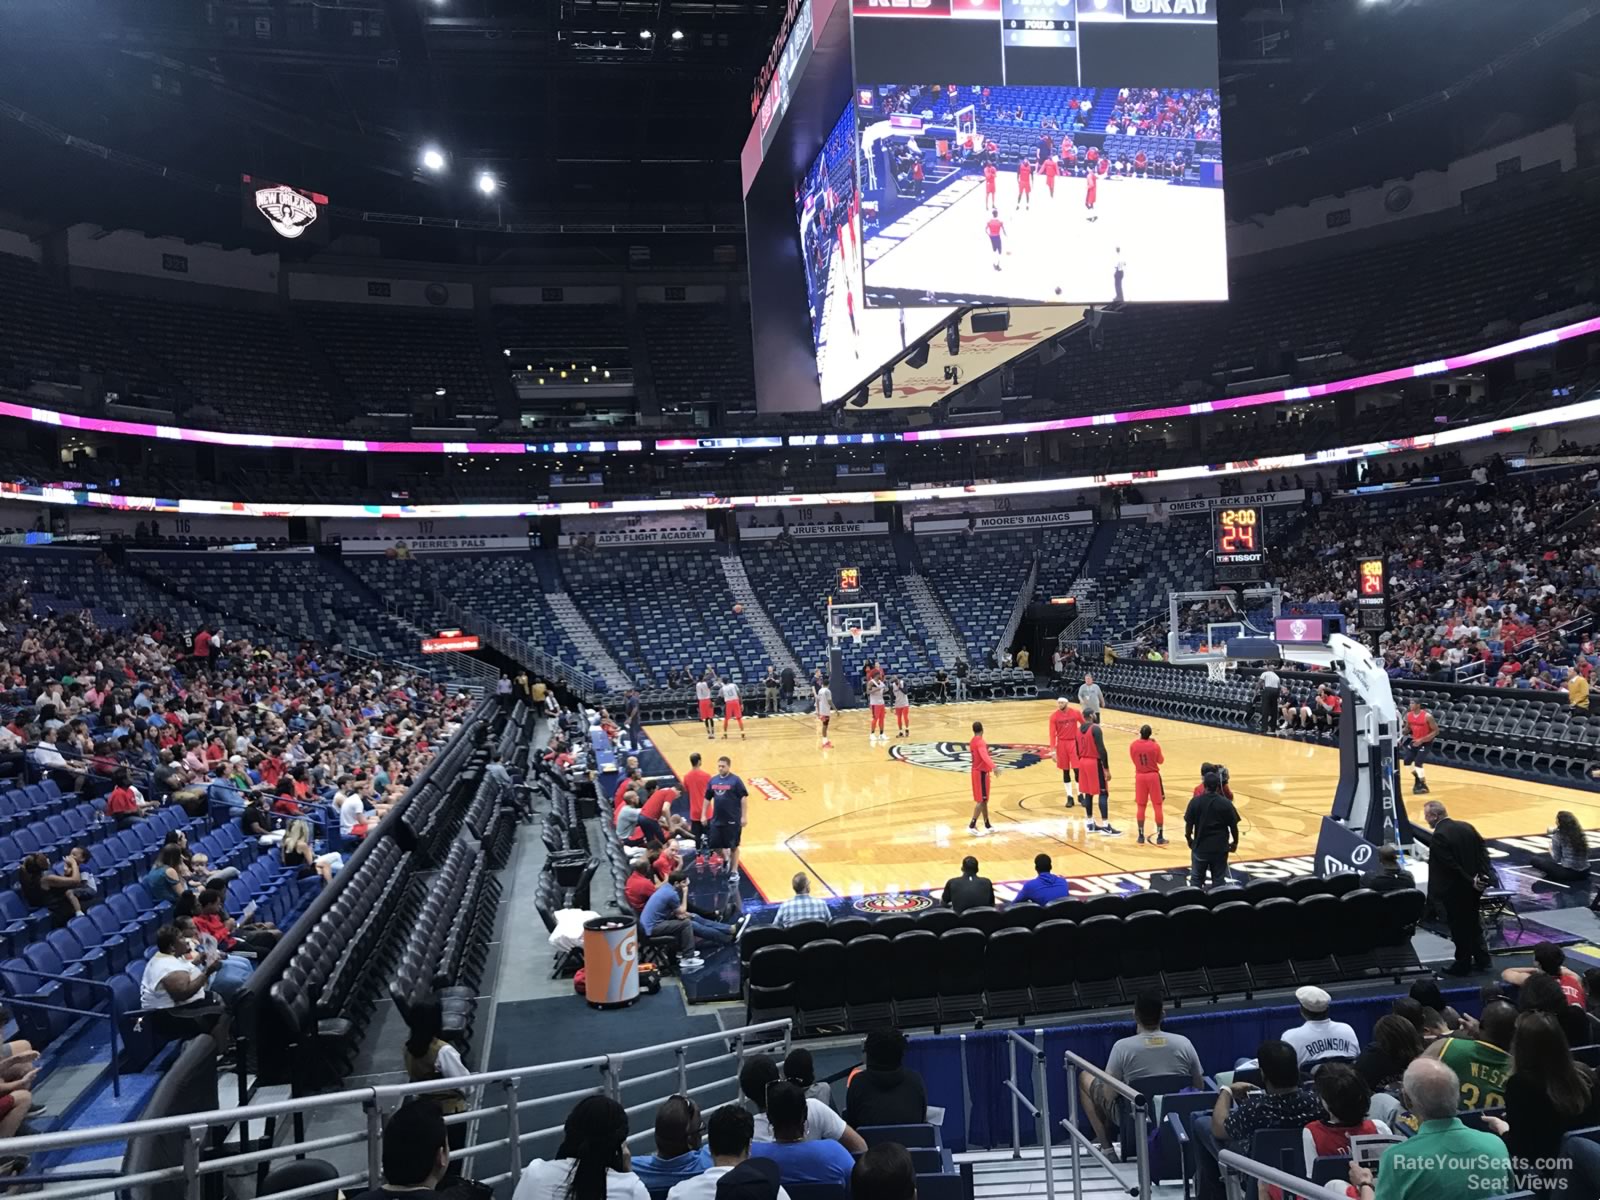 section 108, row 9 seat view  for basketball - smoothie king center